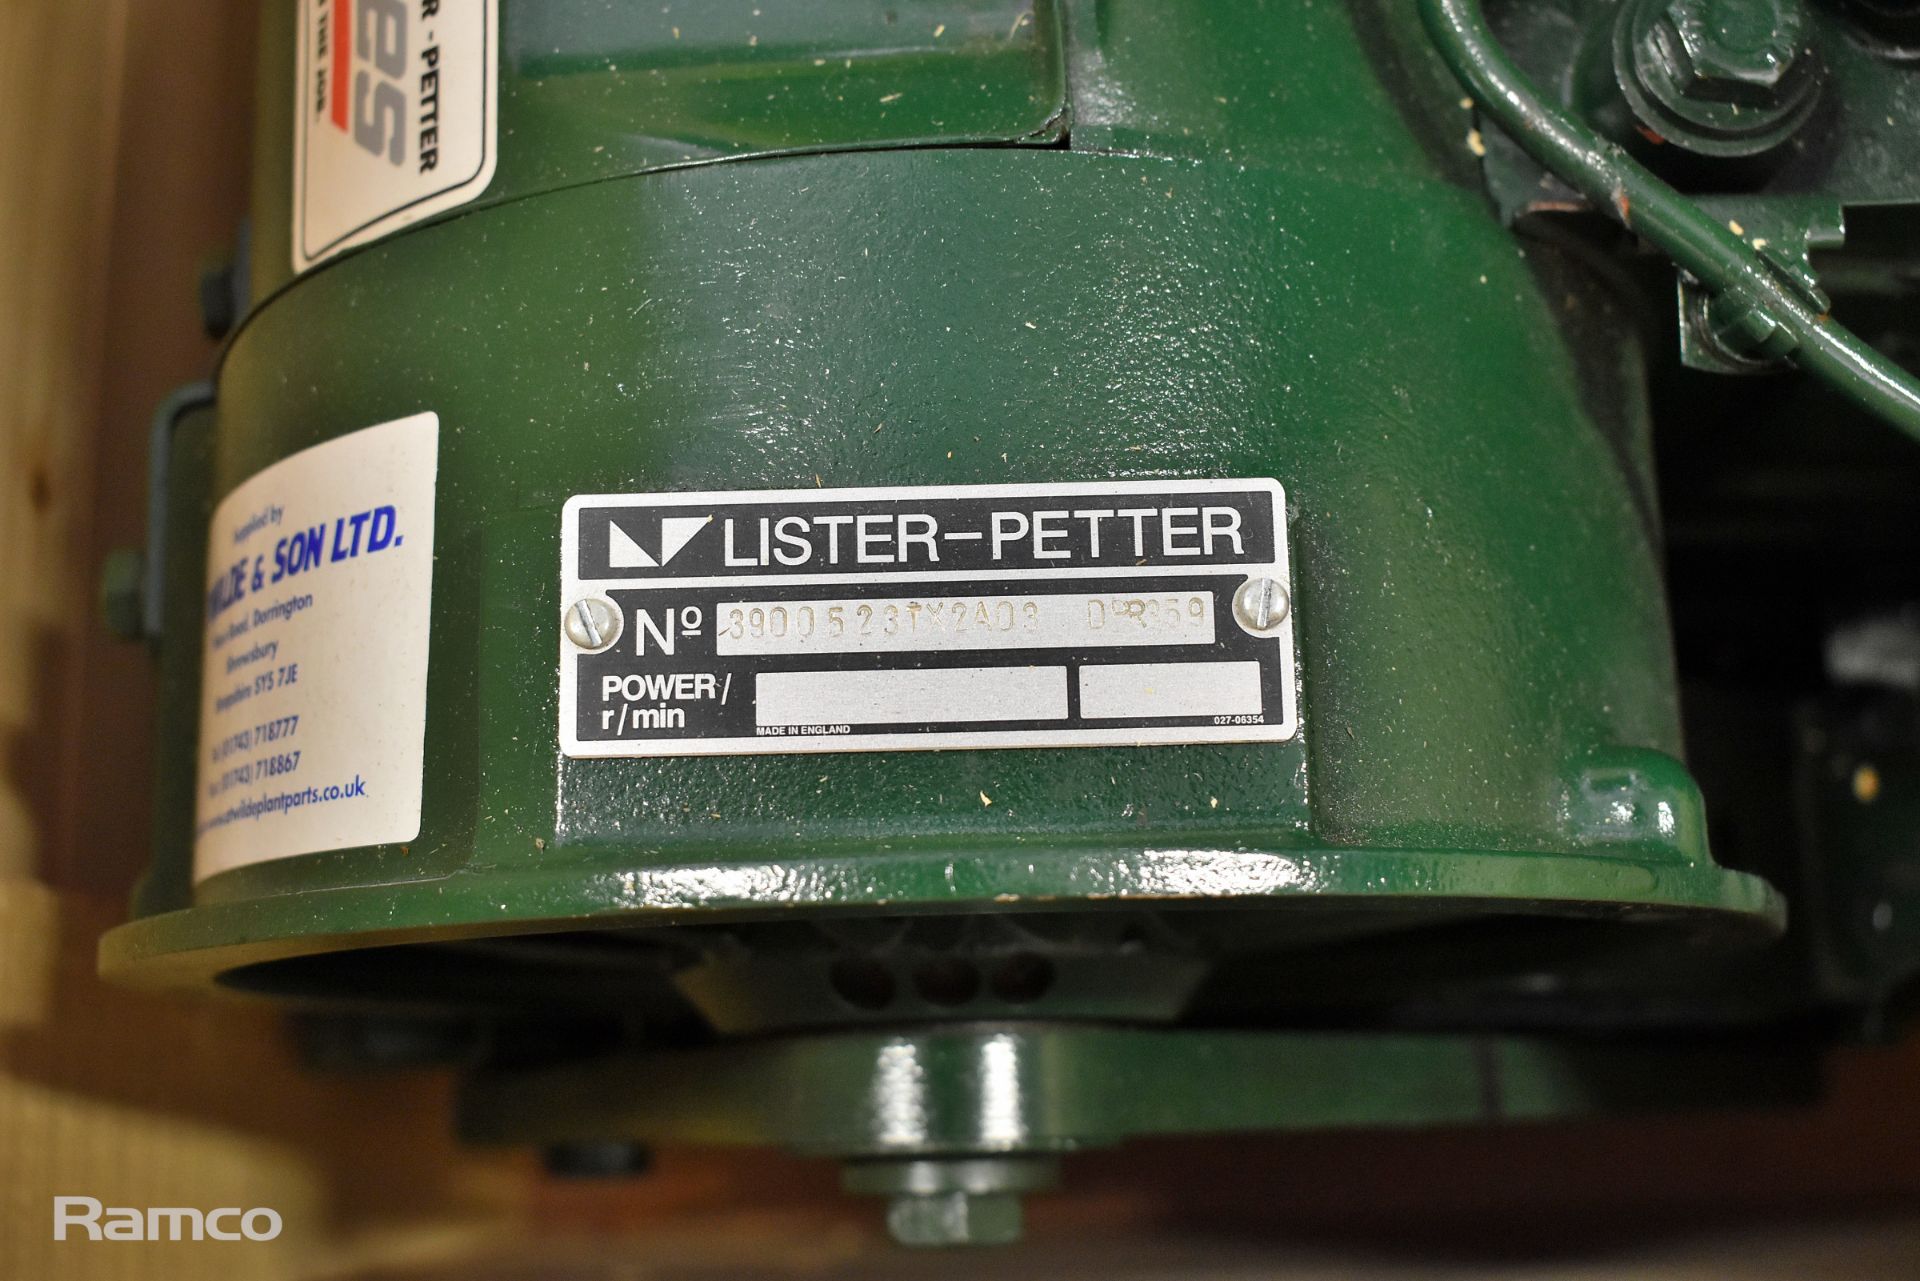 Lister Petter T-Series X3 diesel engine - Image 3 of 4